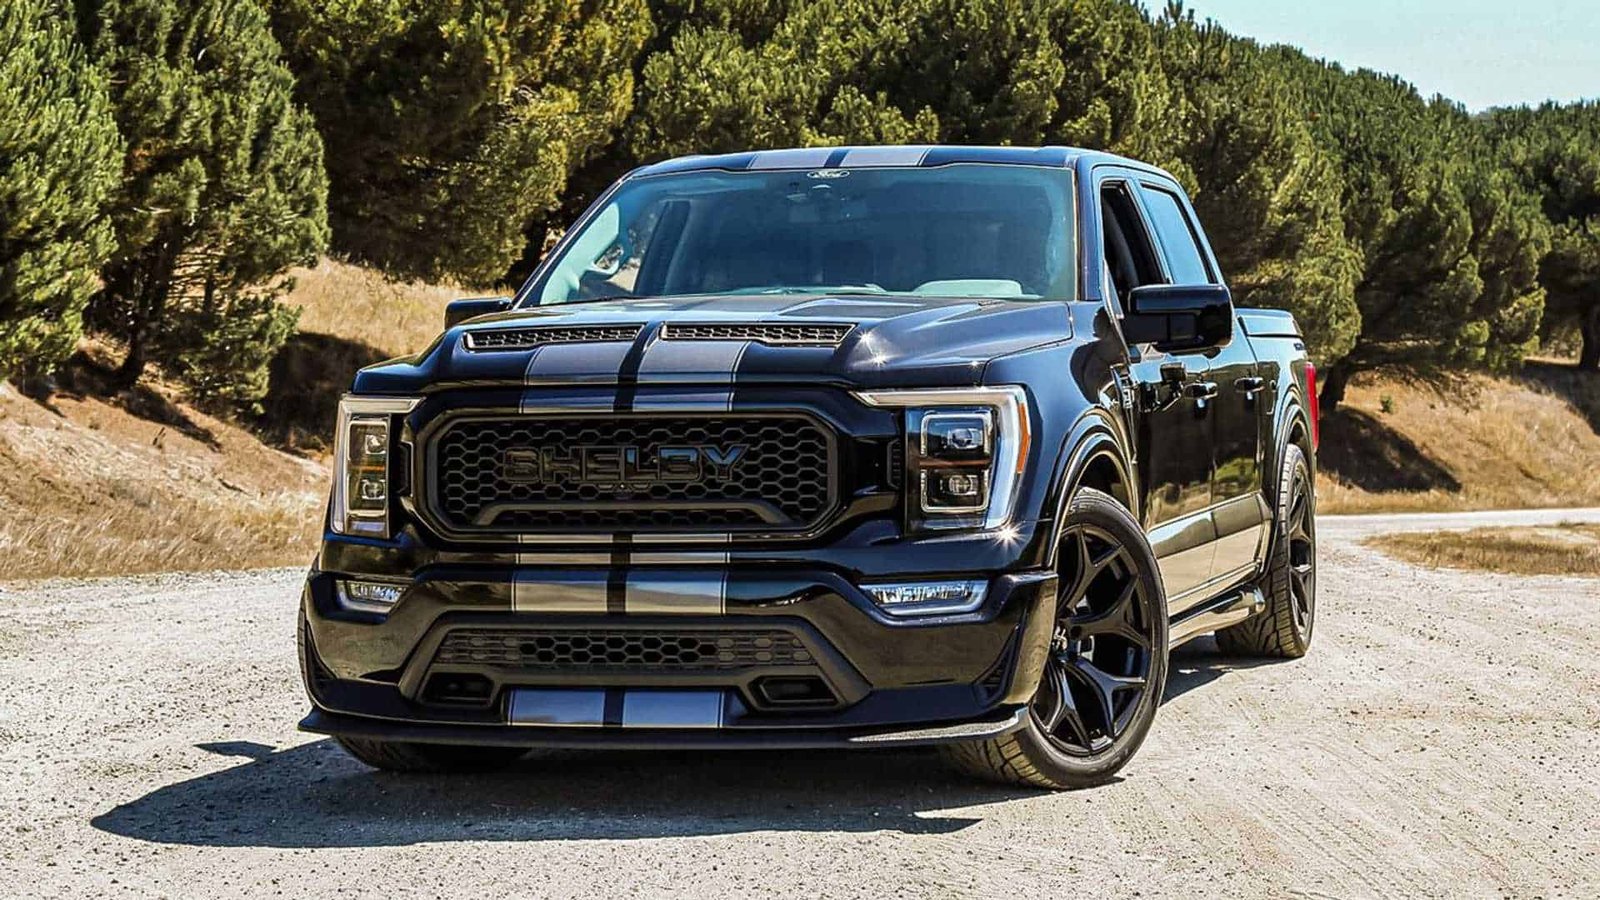 Ford Shelby Truck: Exploring the Power and Elegance